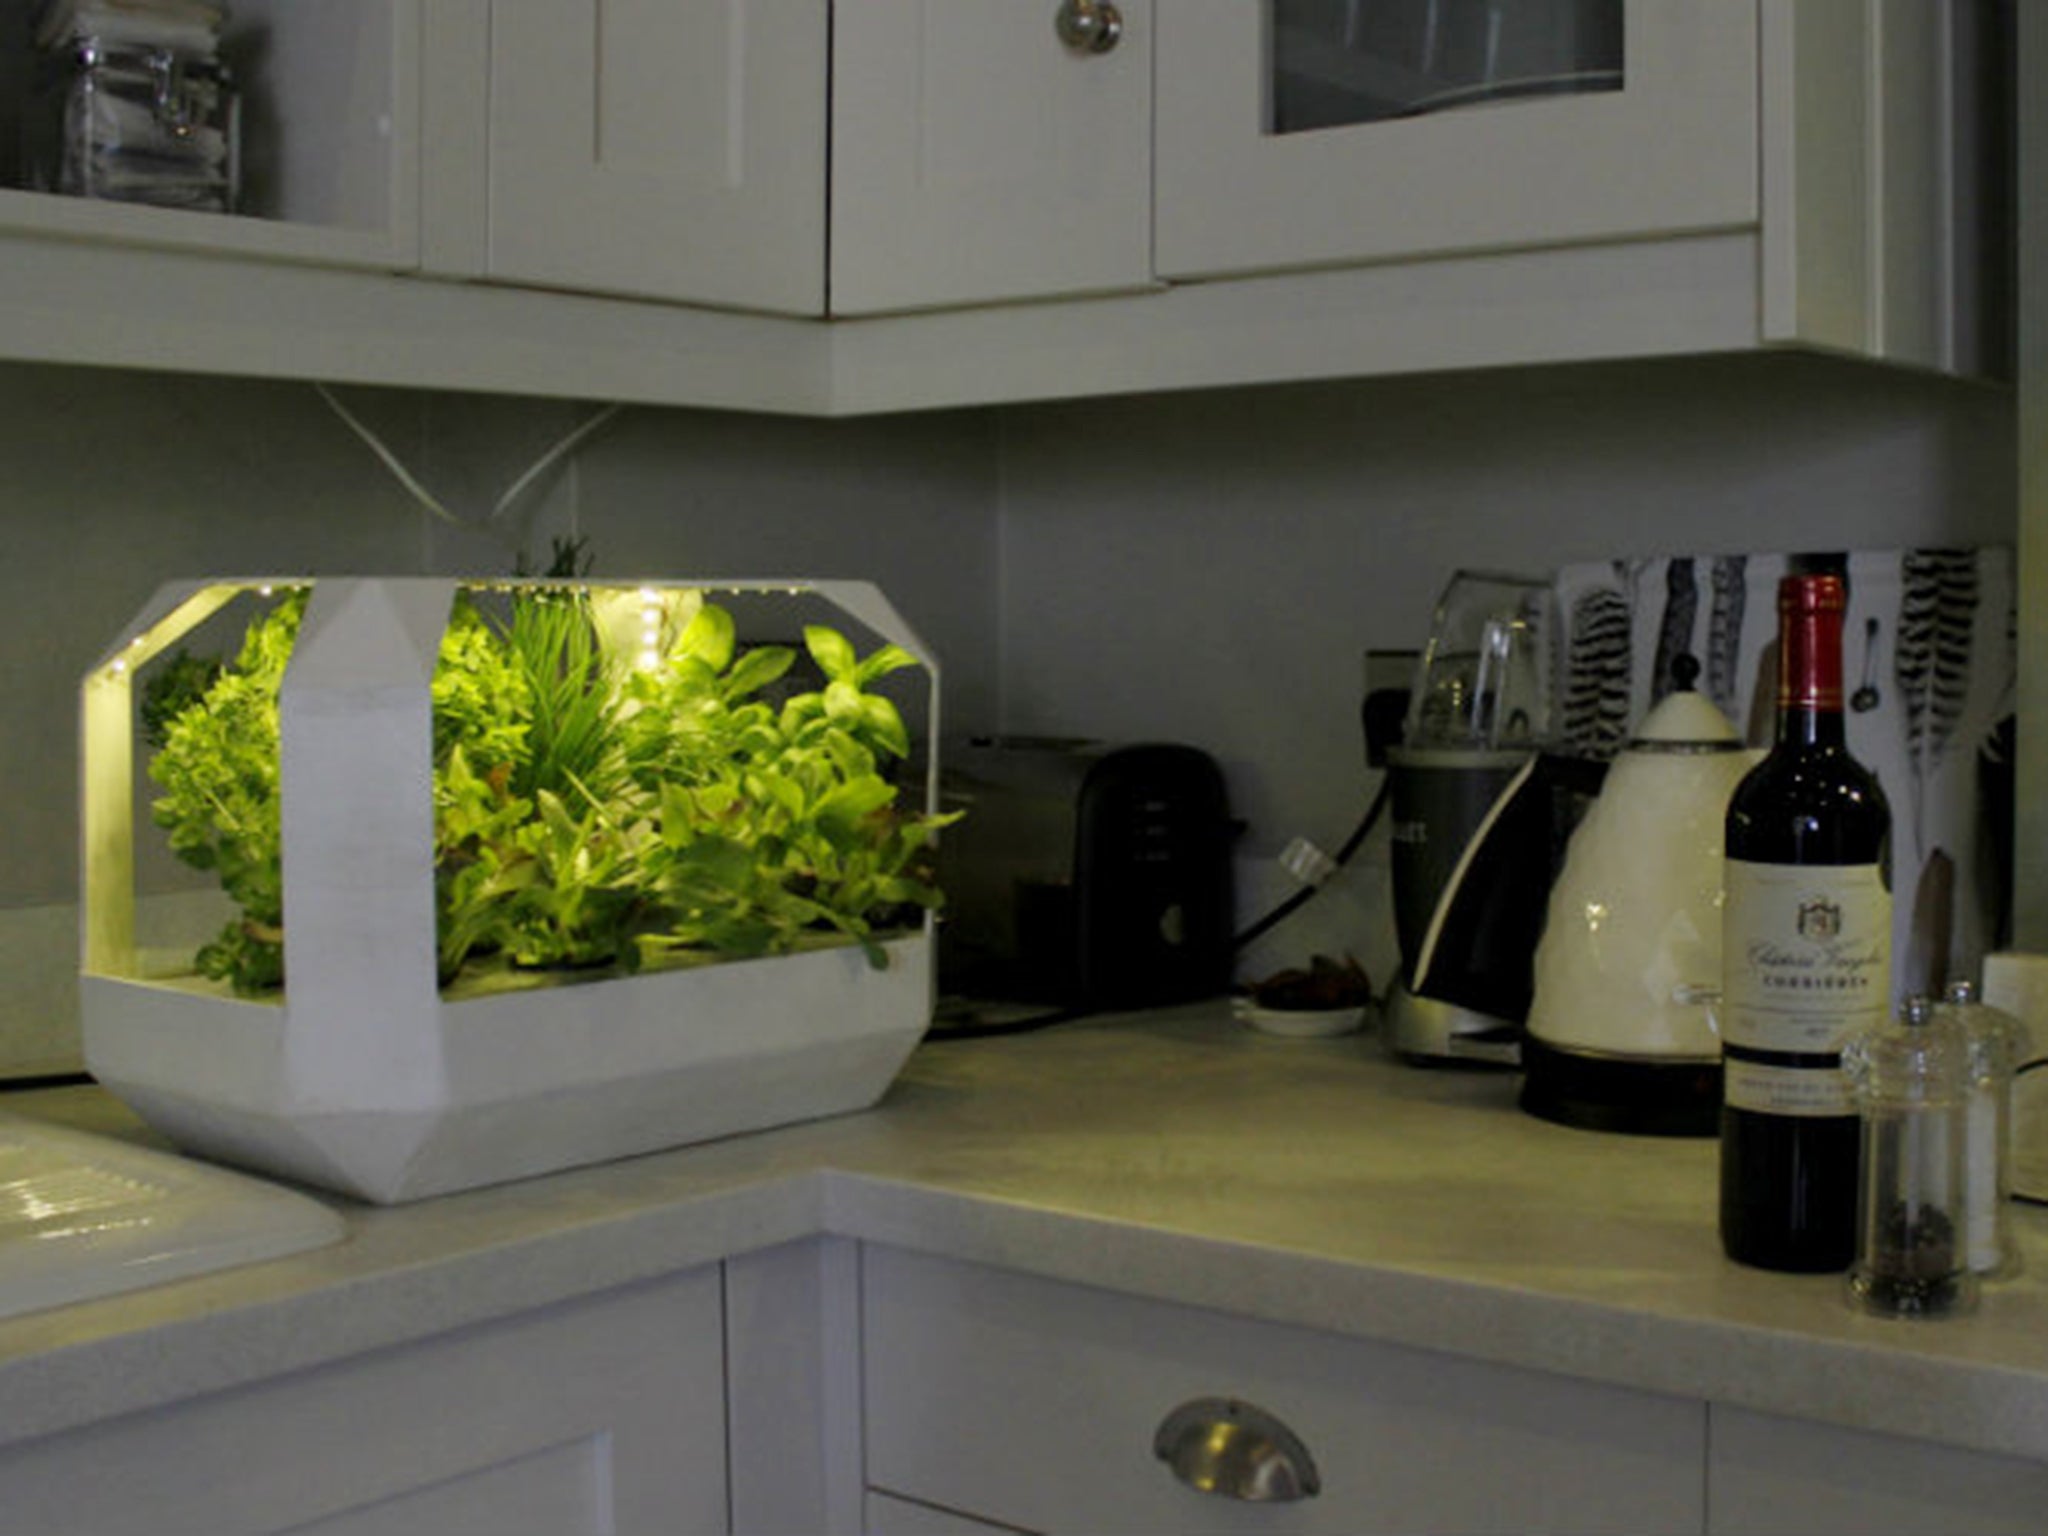 LettUs grow have developed a "Salad Bar" planter to grow vegetables in the home